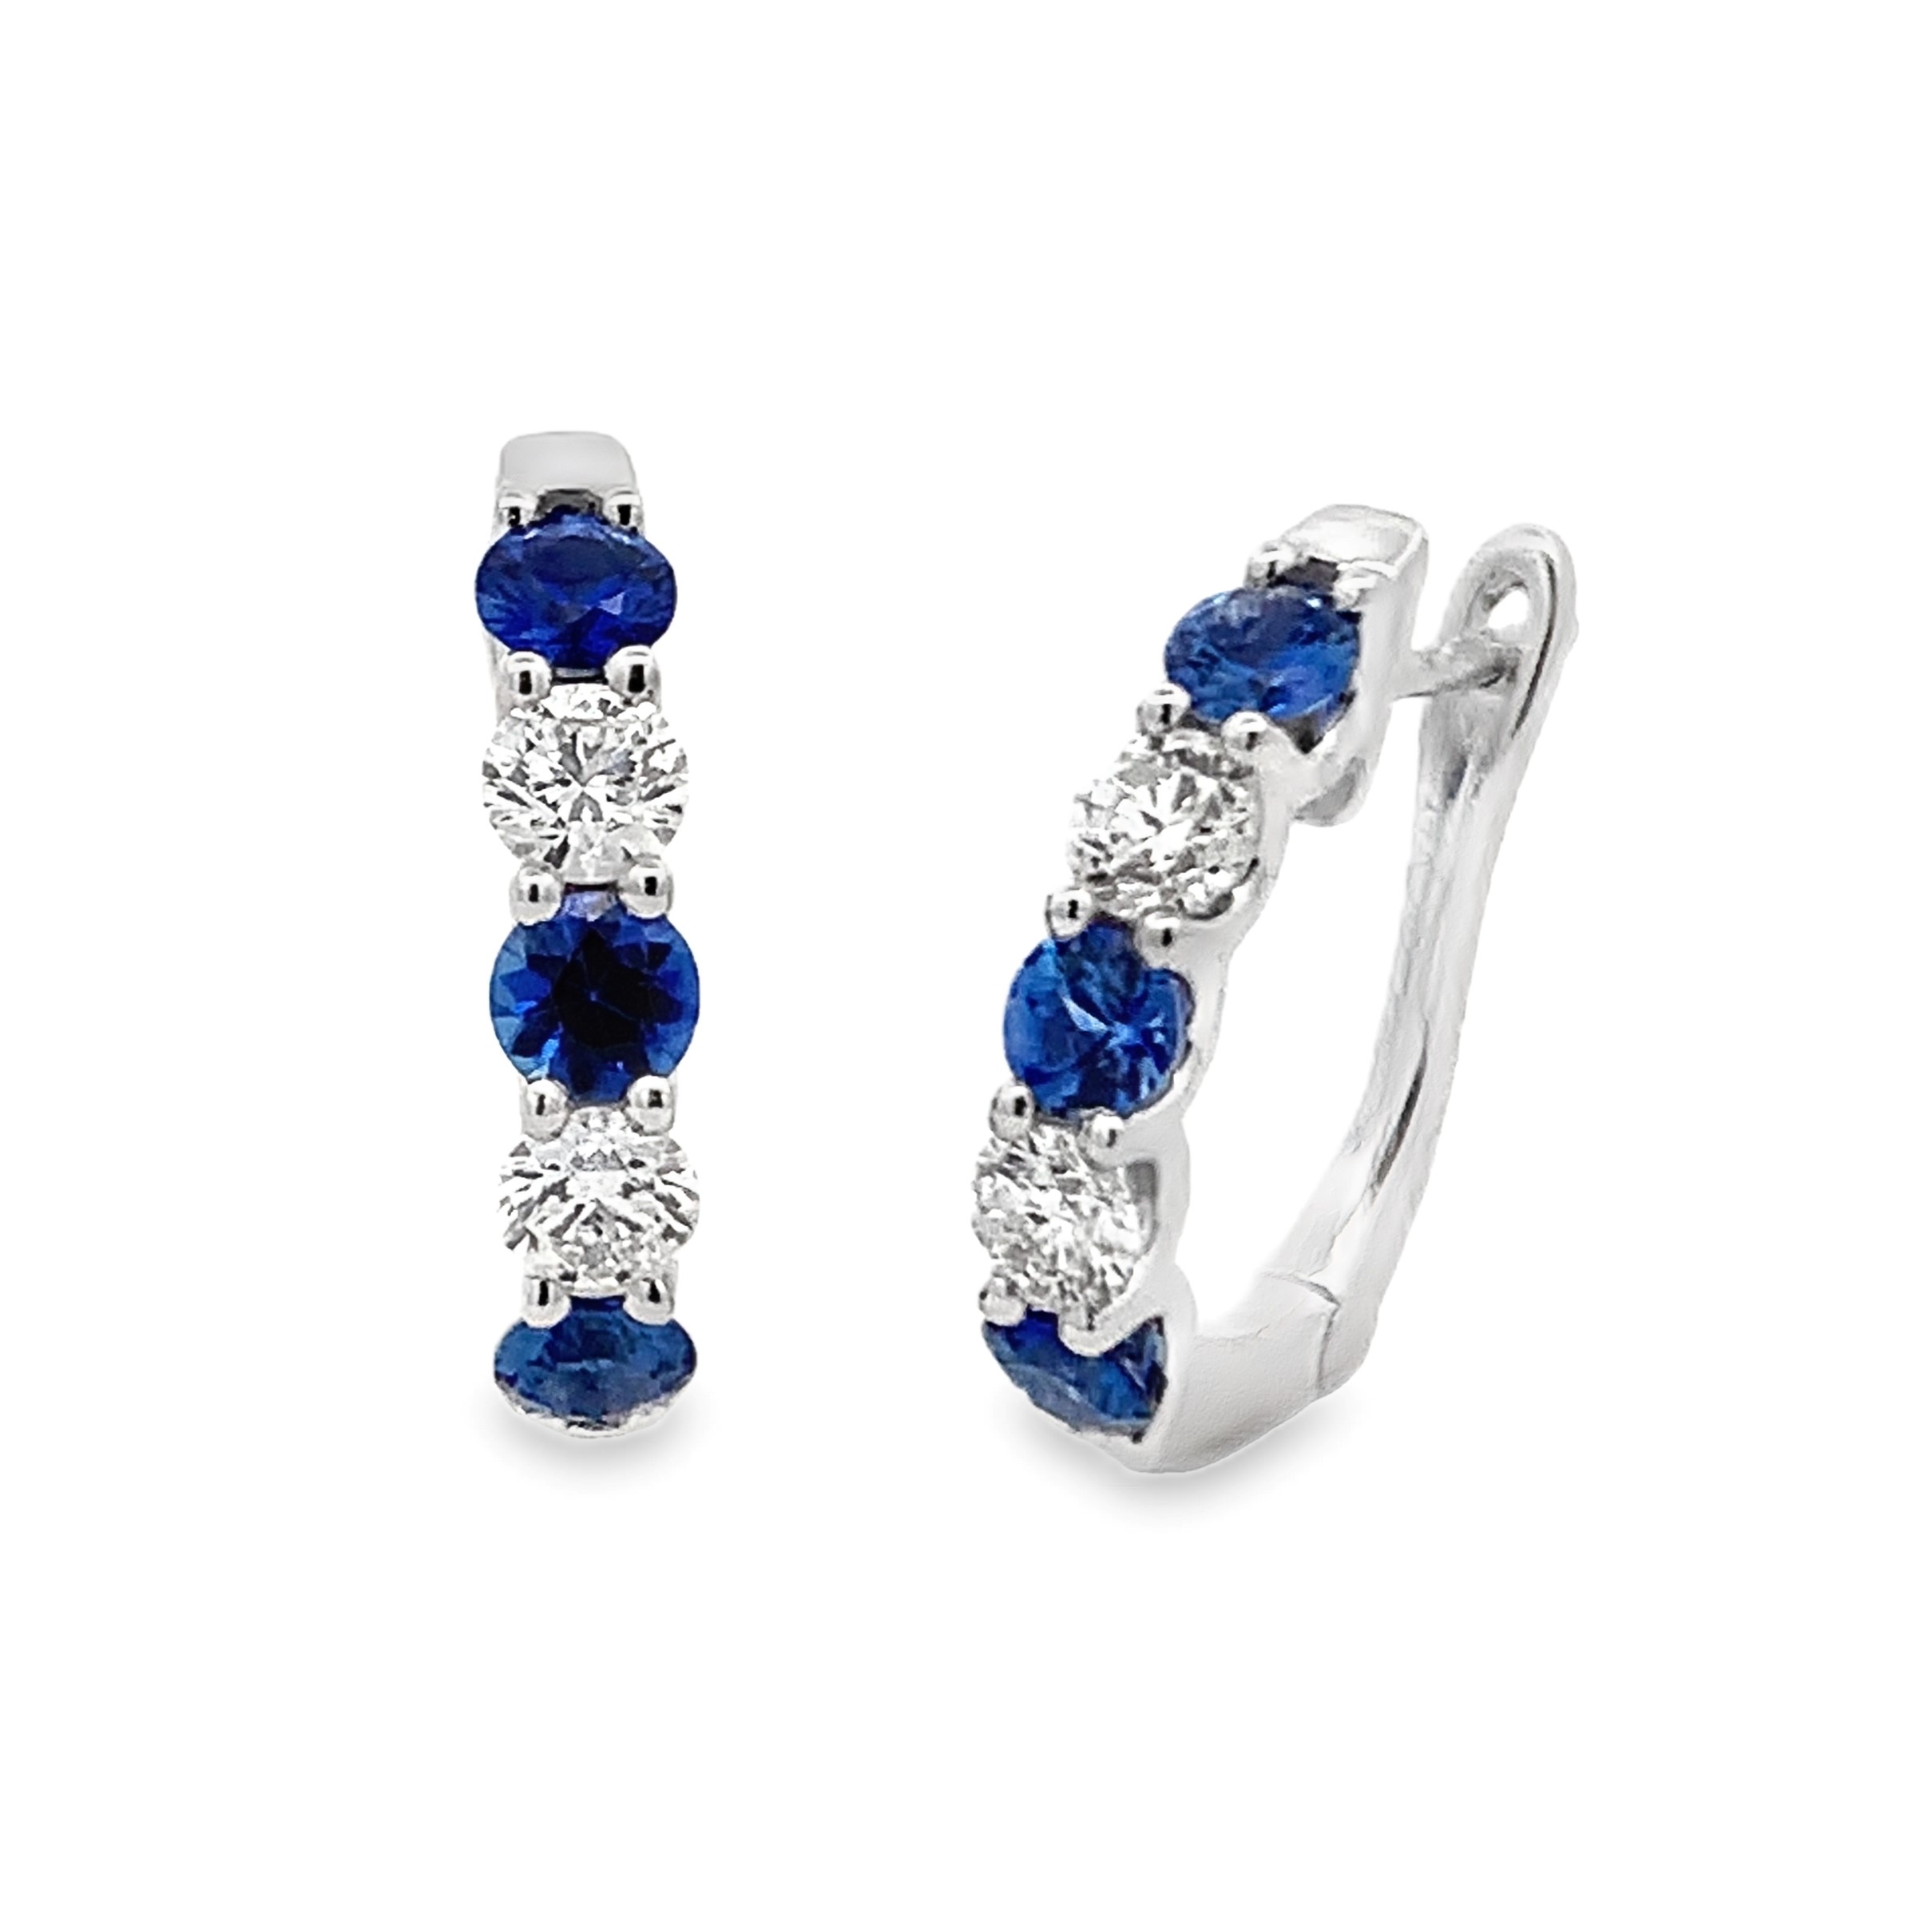 14K White Gold Sapphire and Diamond Hoops